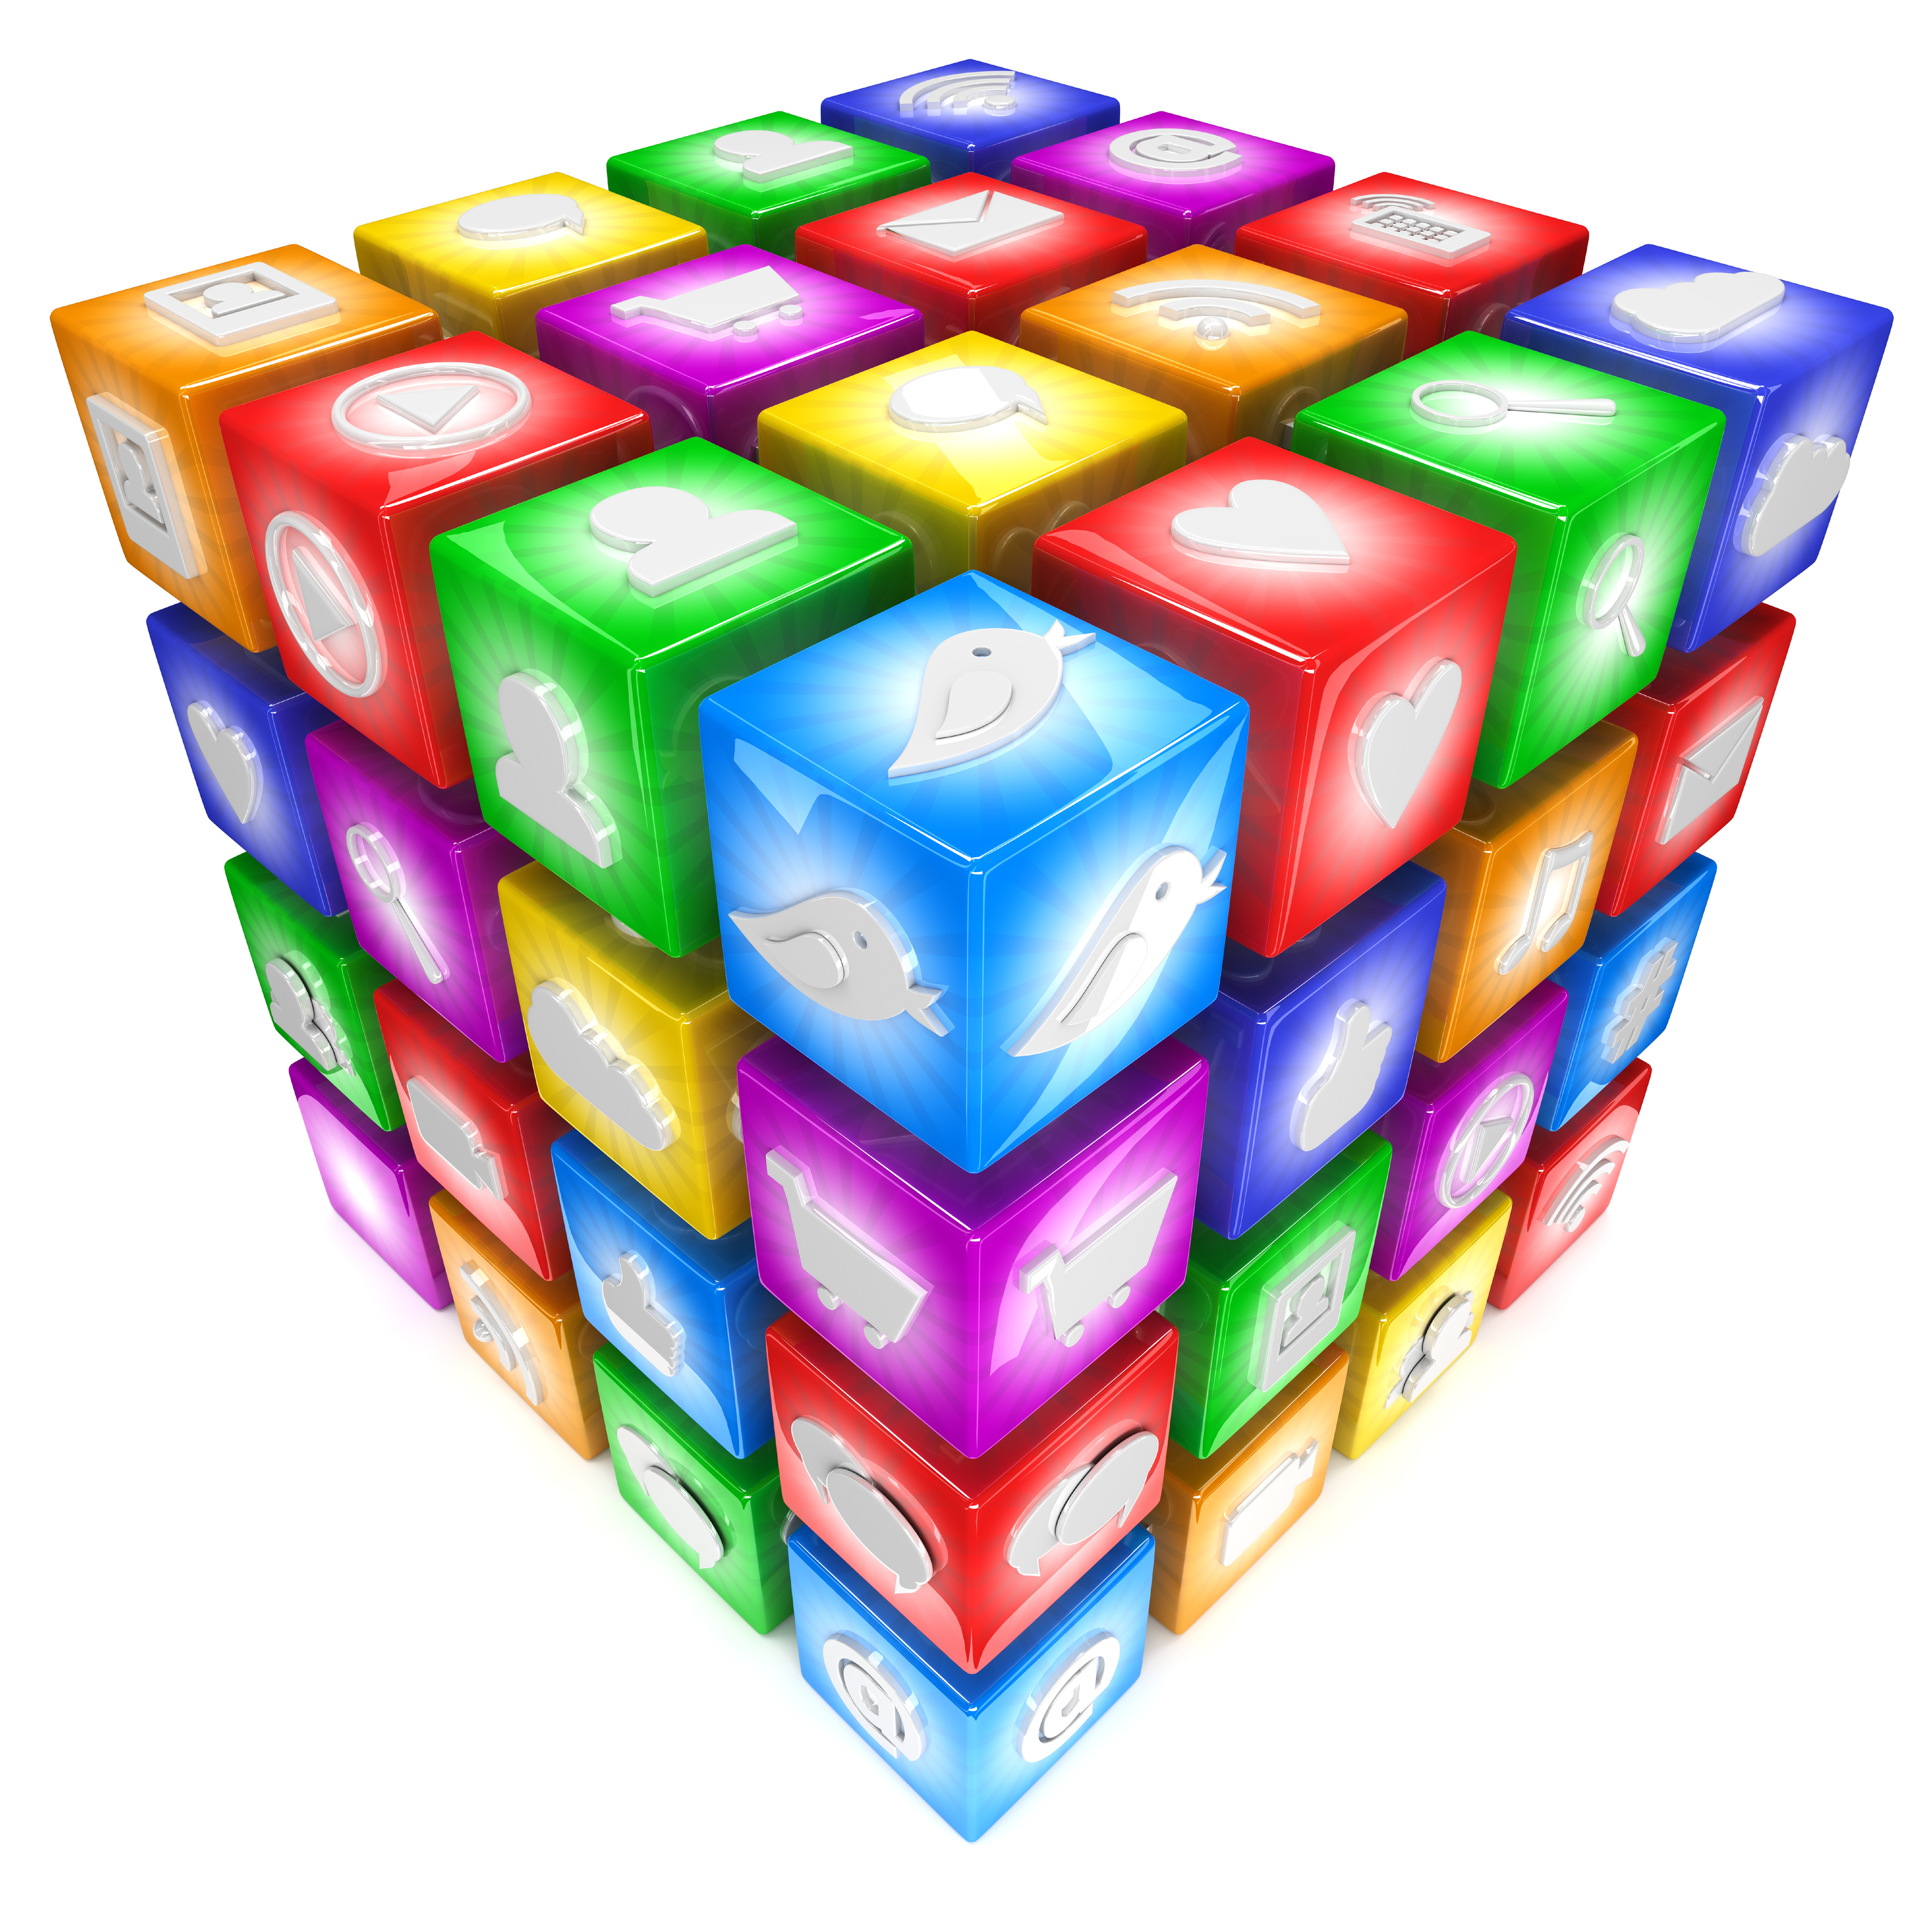 graphic of a rubik's cube with social media logos